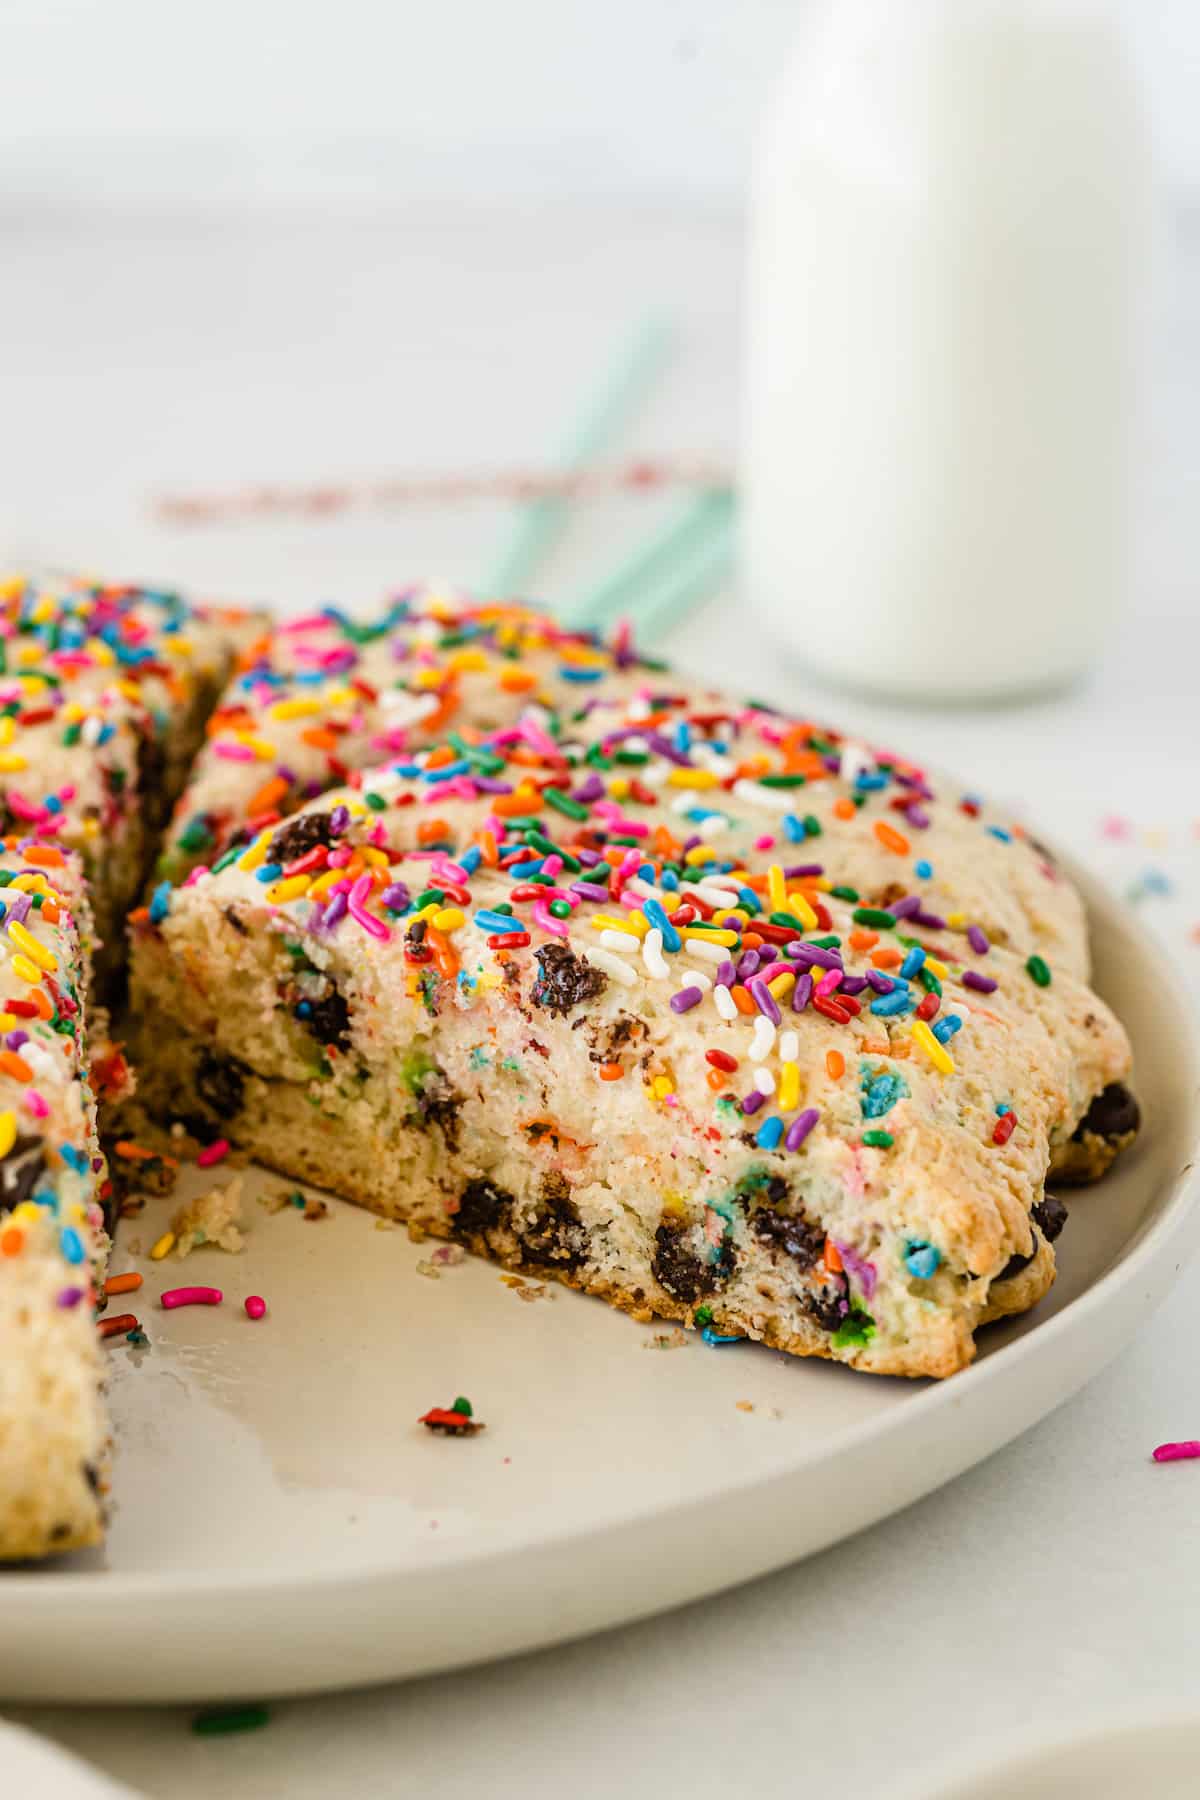 scones with sprinkles and chocolate baked in on a tan plate